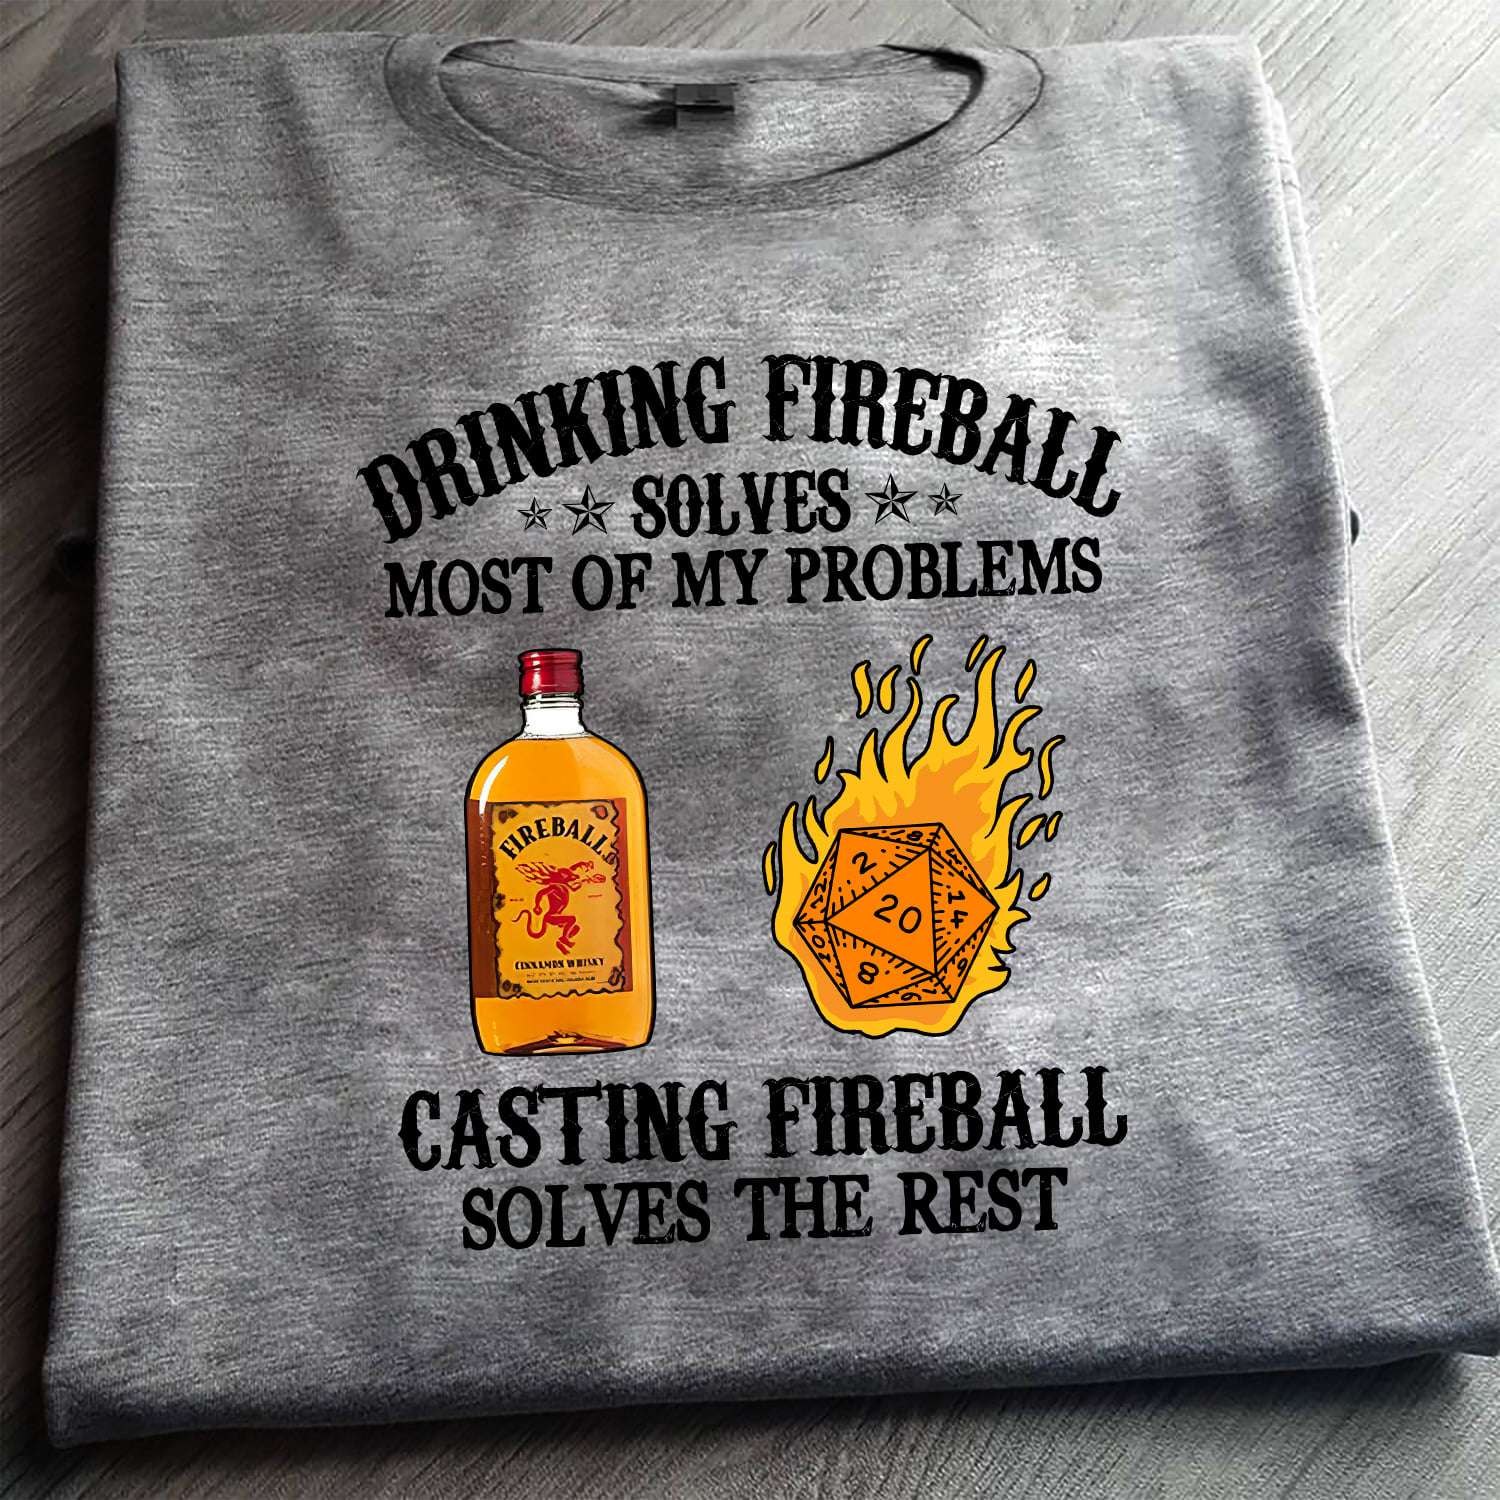 Drinking fireballs olves most of my problems - Casting fireball solves the rest